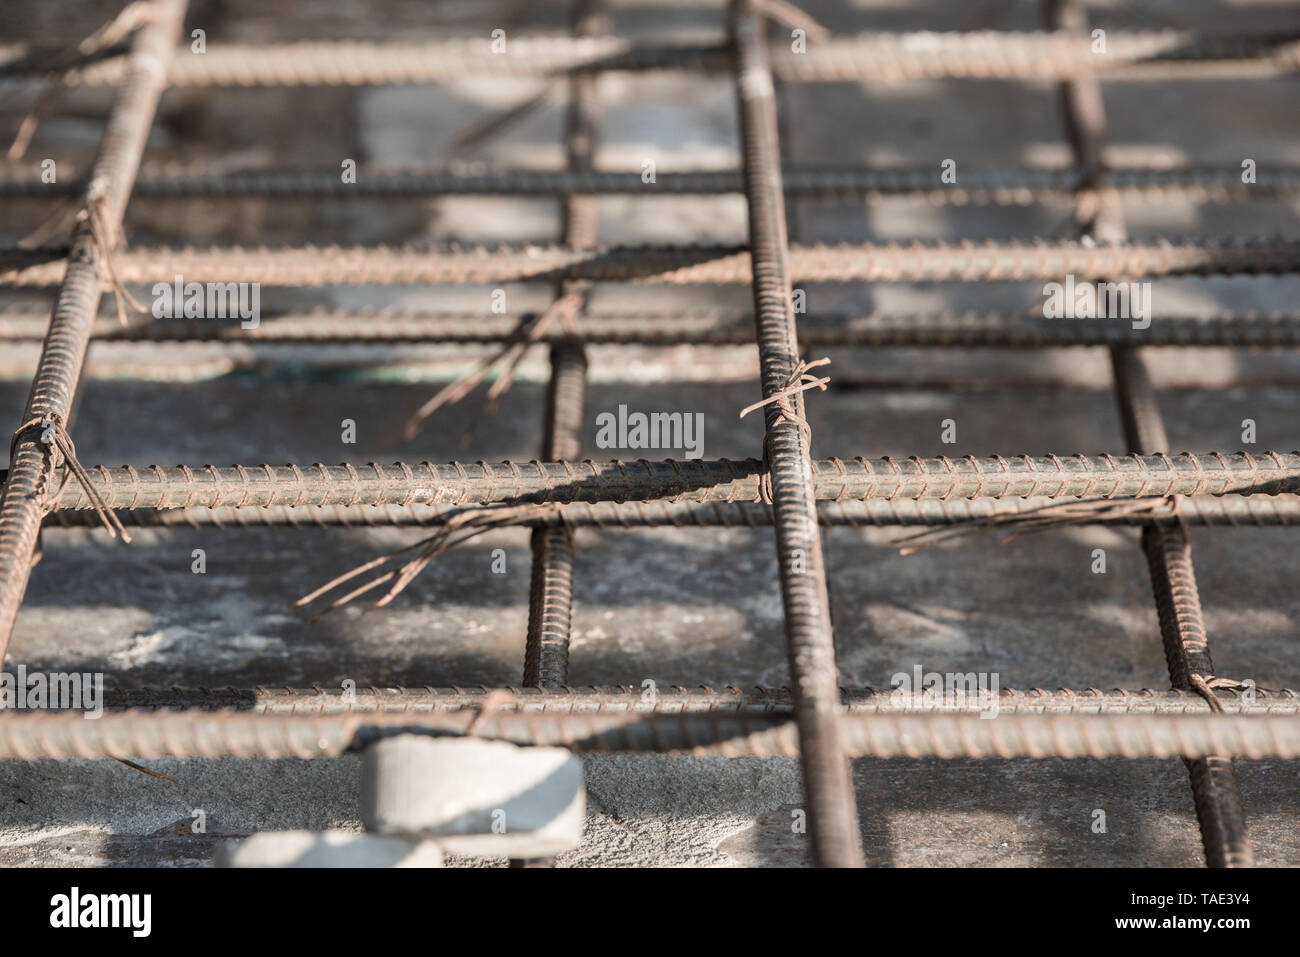 Using steel wire for securing steel bars with wire rod for reinforcement of concrete slab or focus to steel wire. Stock Photo